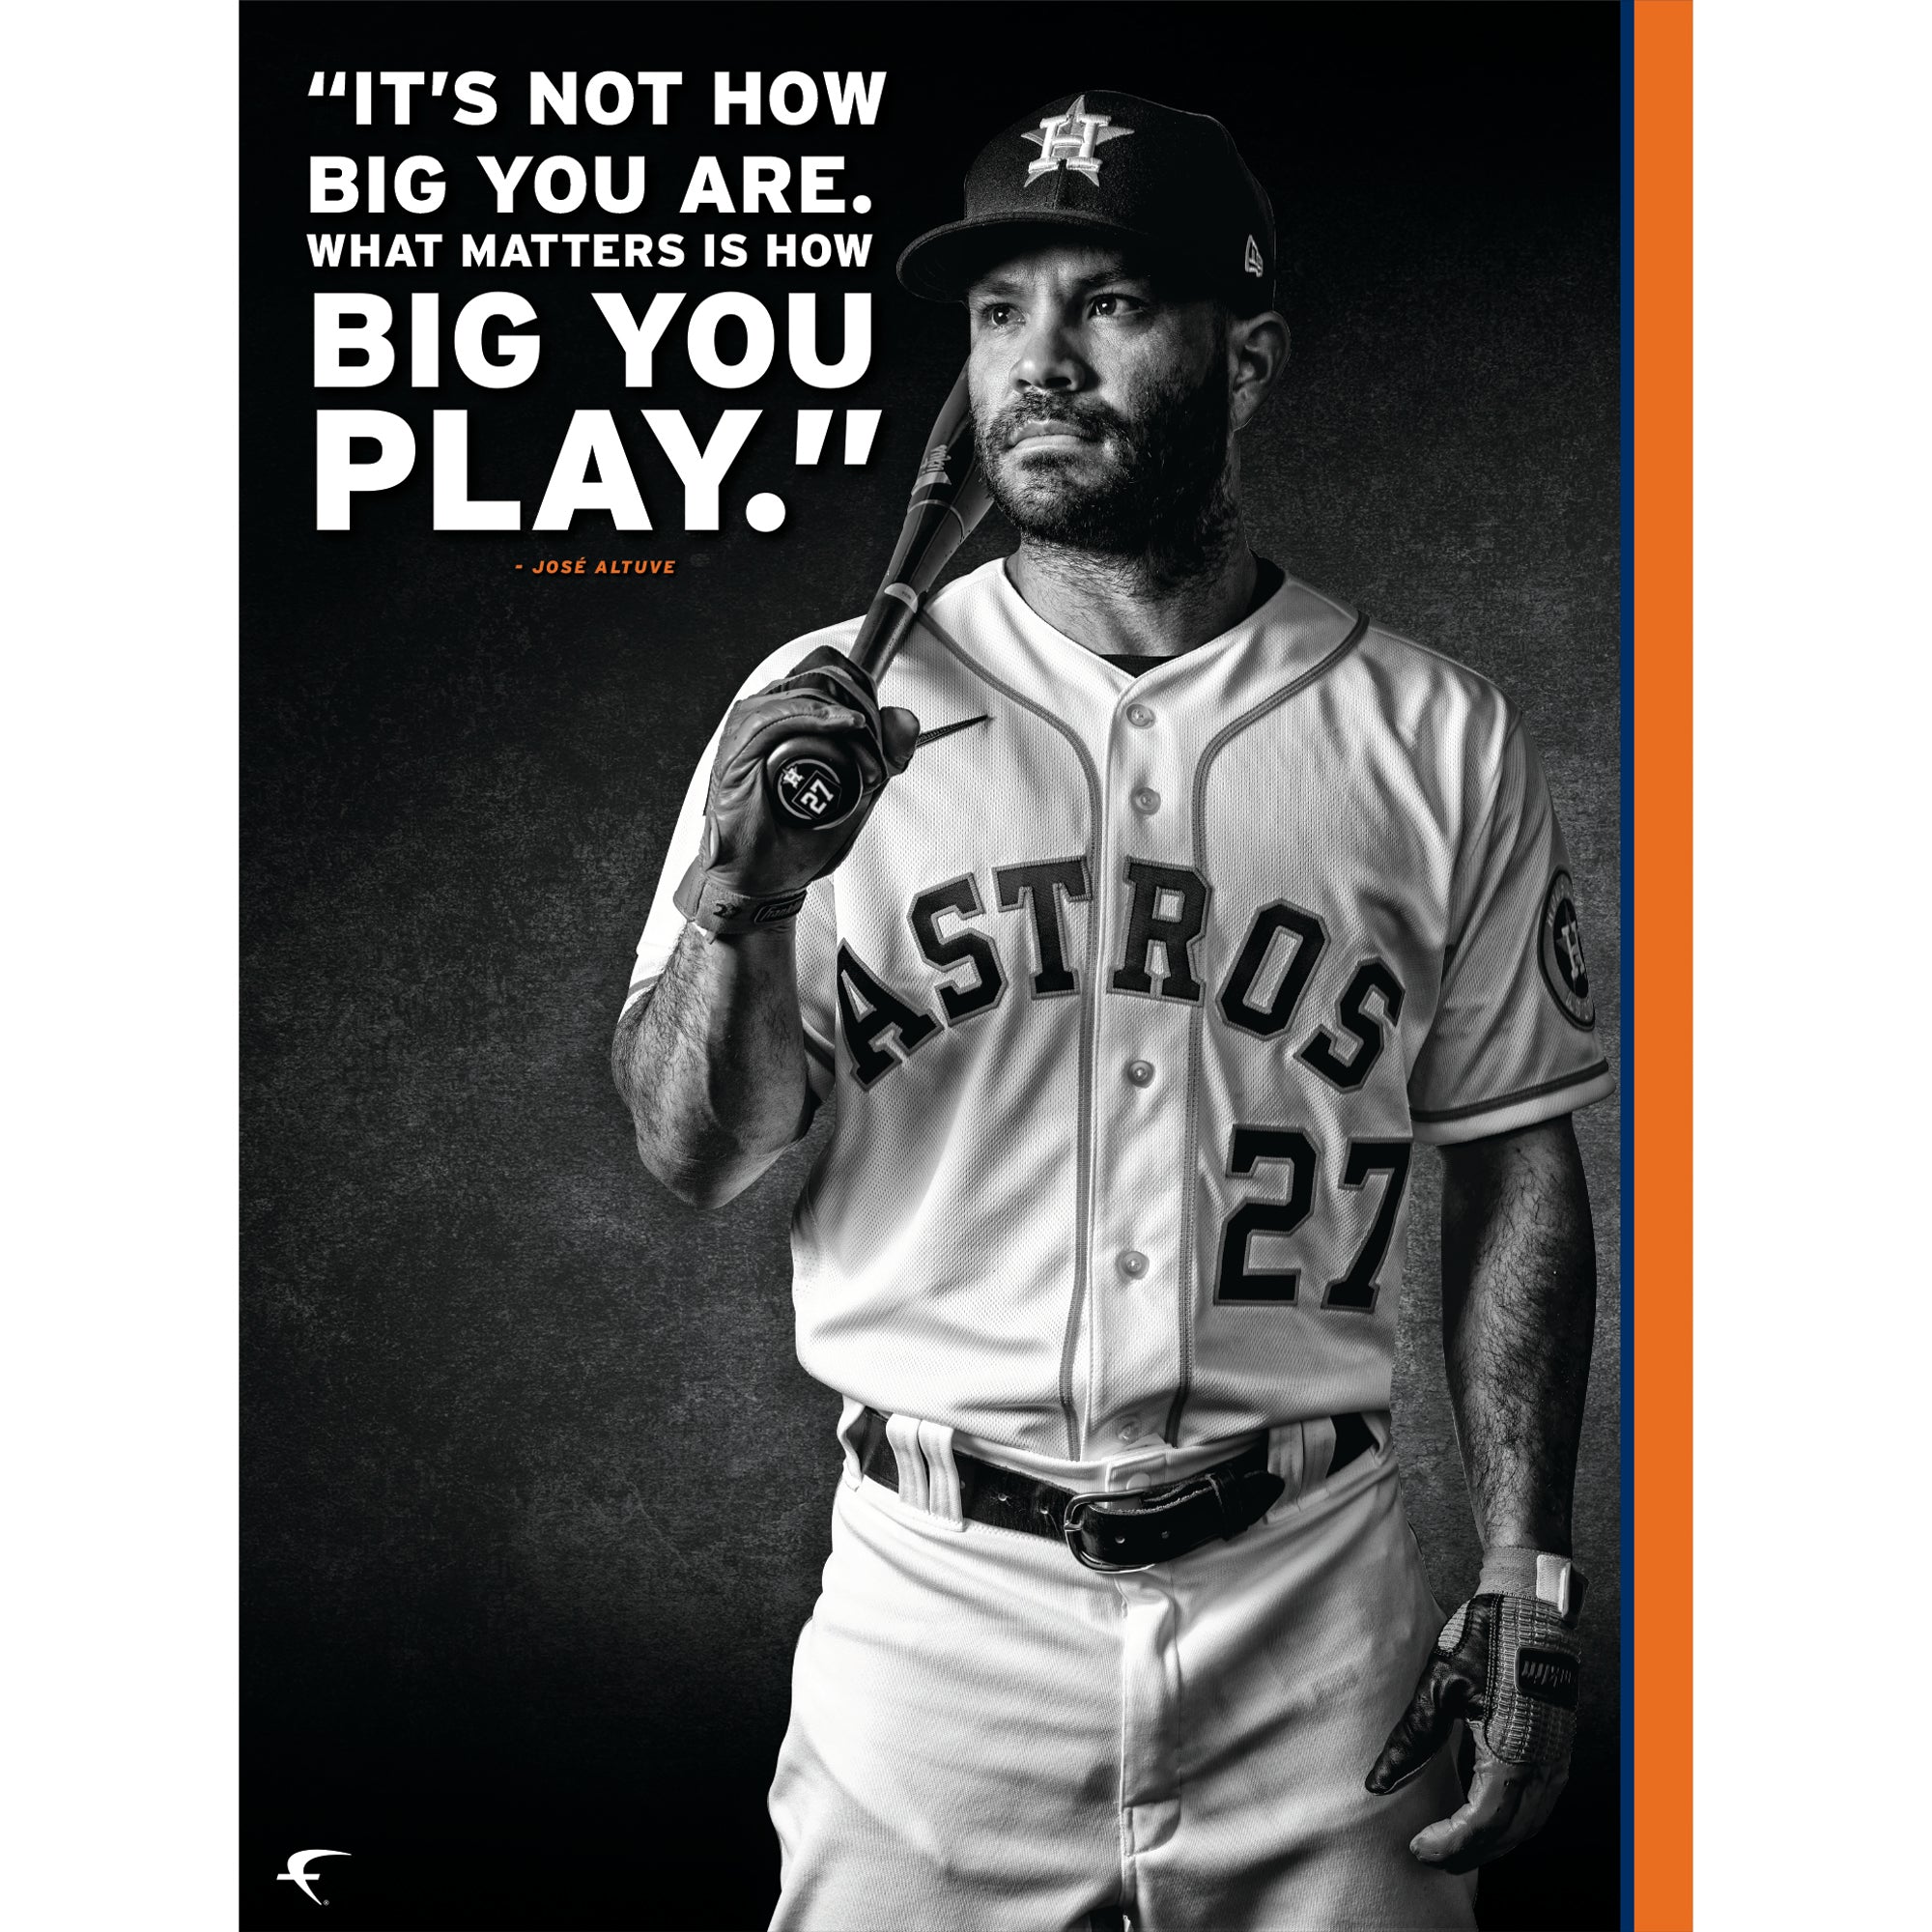 Jose Altuve: Batting - Officially Licensed MLB Removable Wall Decal